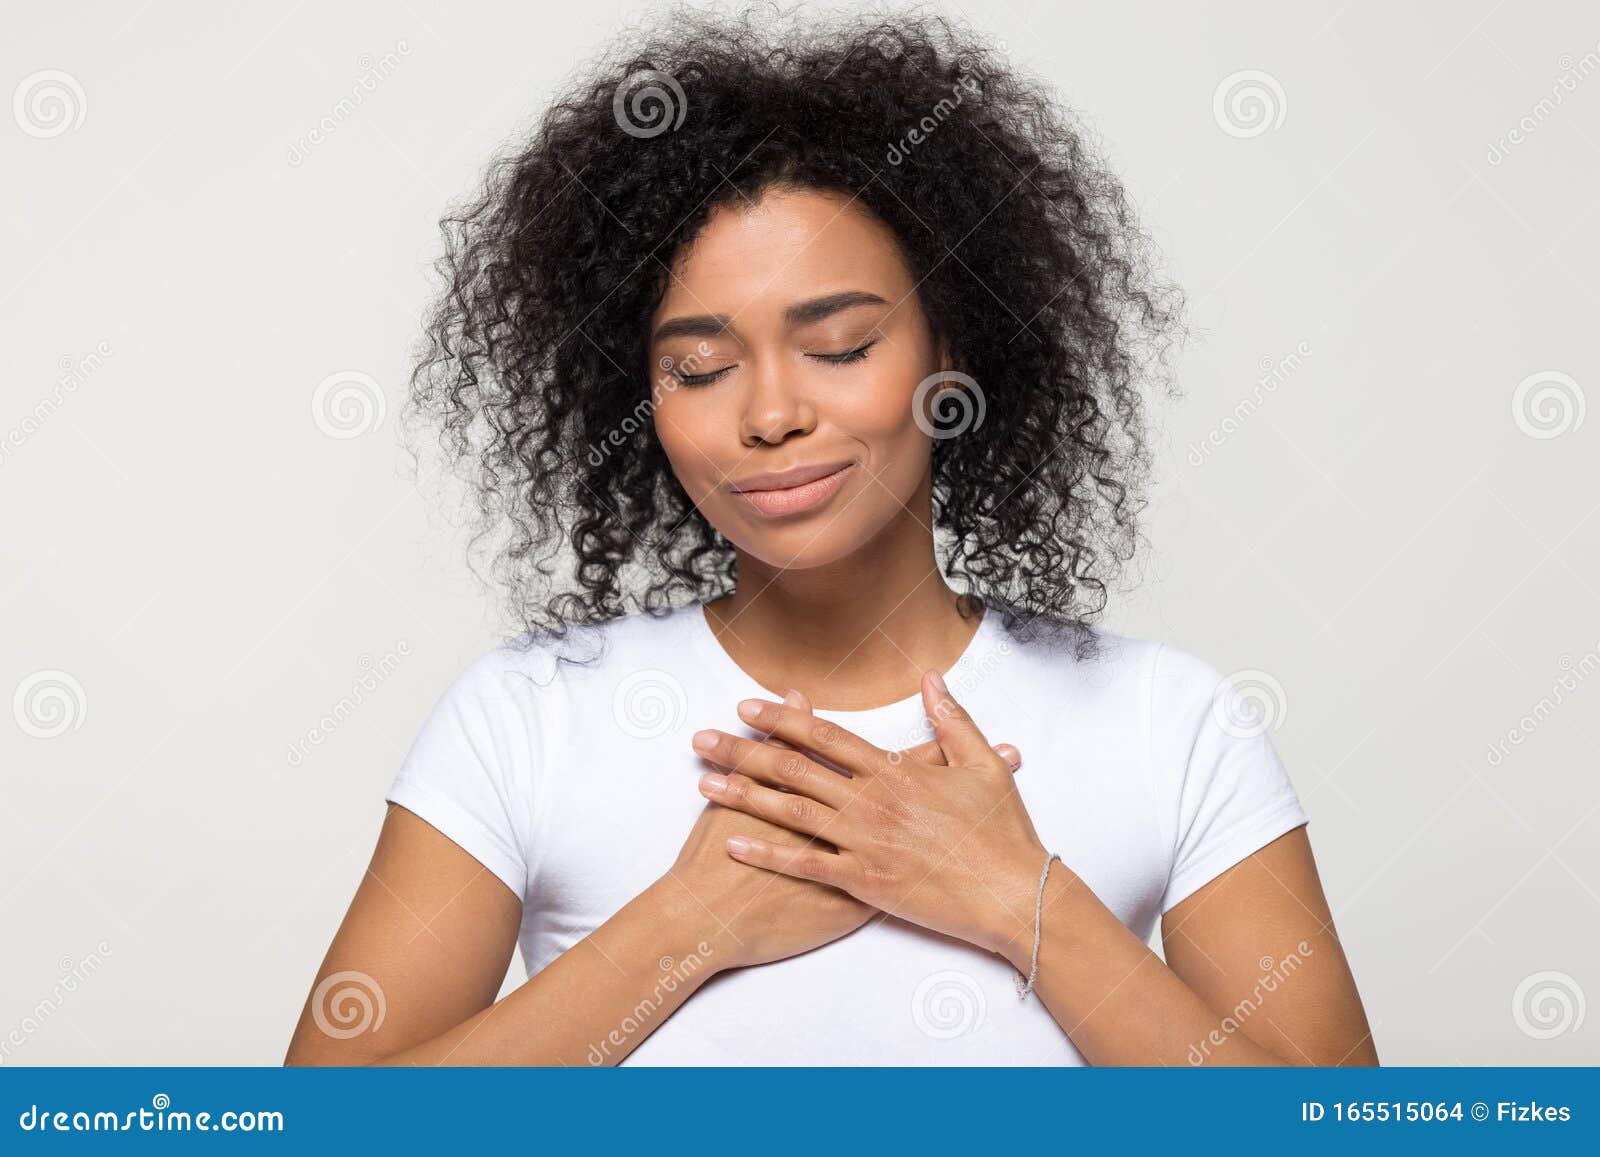 grateful hopeful african american woman holding hands on chest